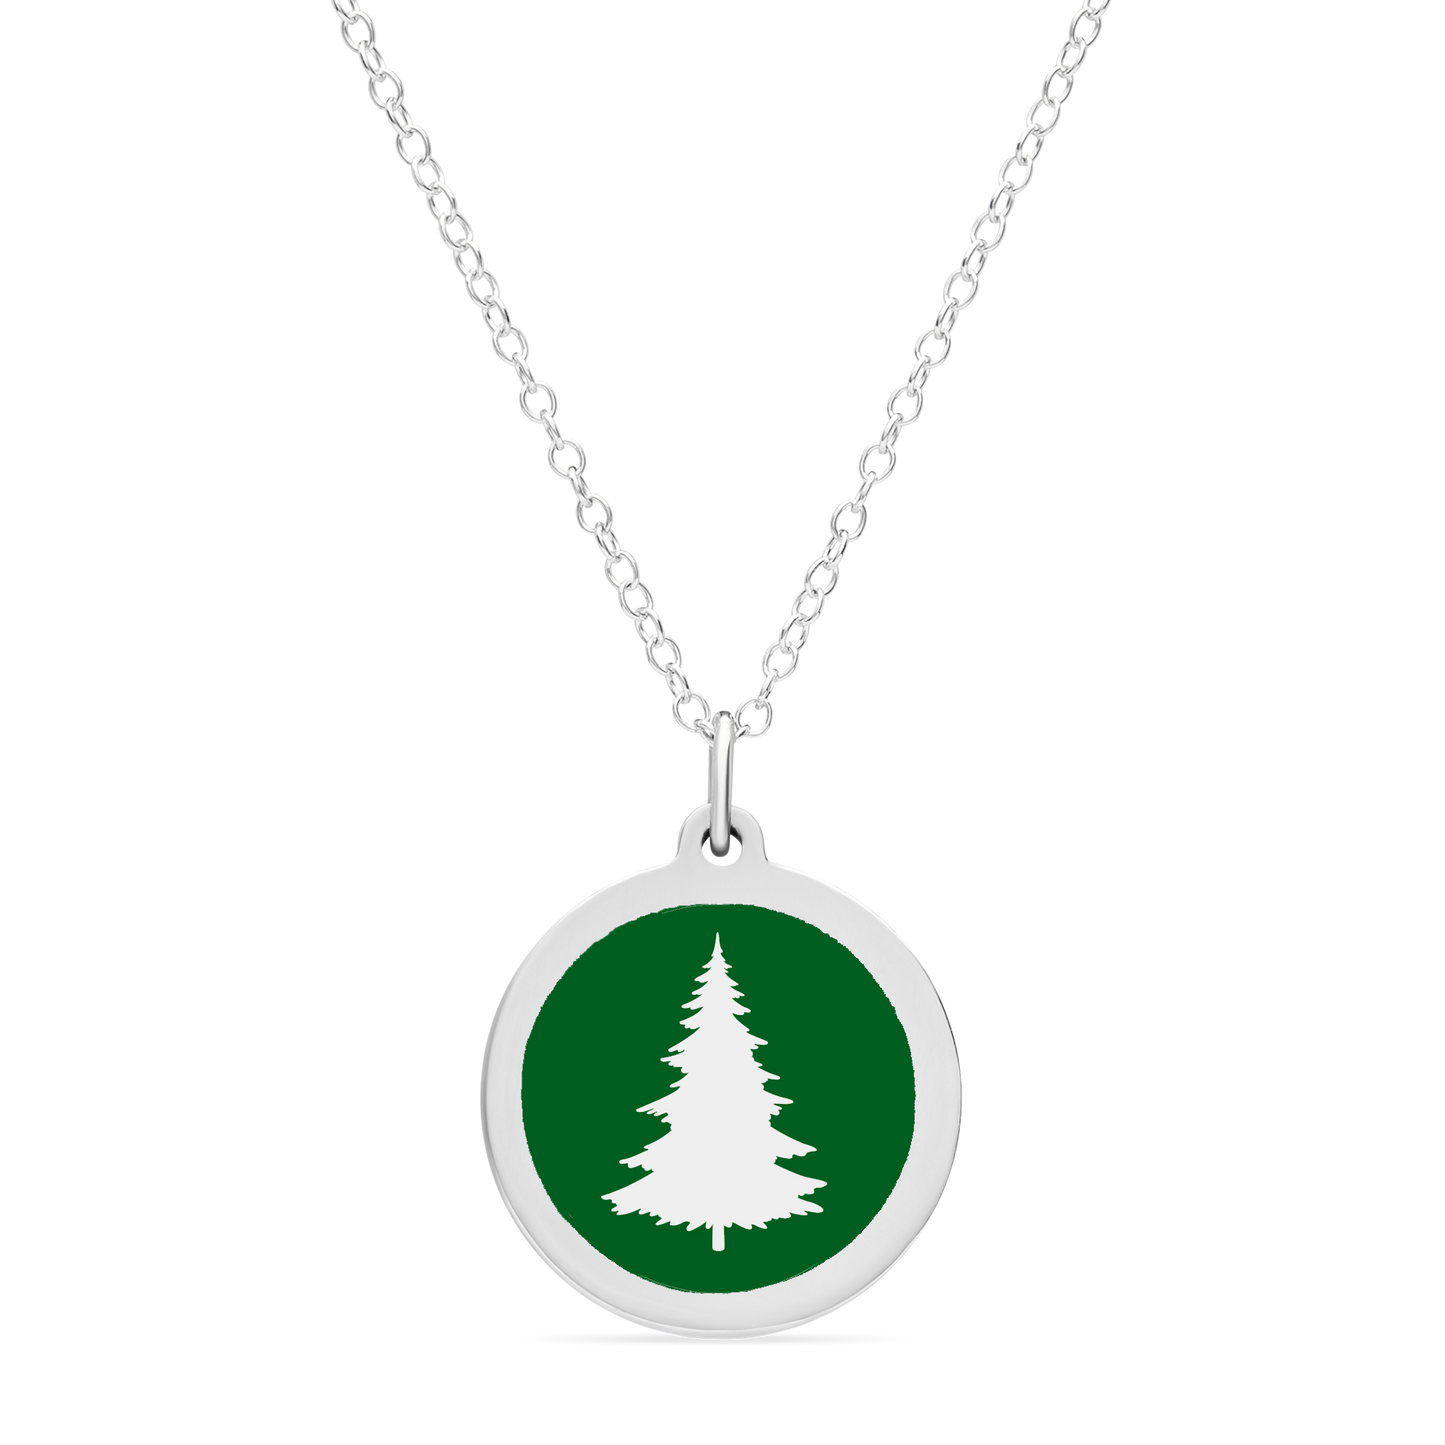 ORIGINAL PINE TREE CHARM in sterling silver with rhodium plate